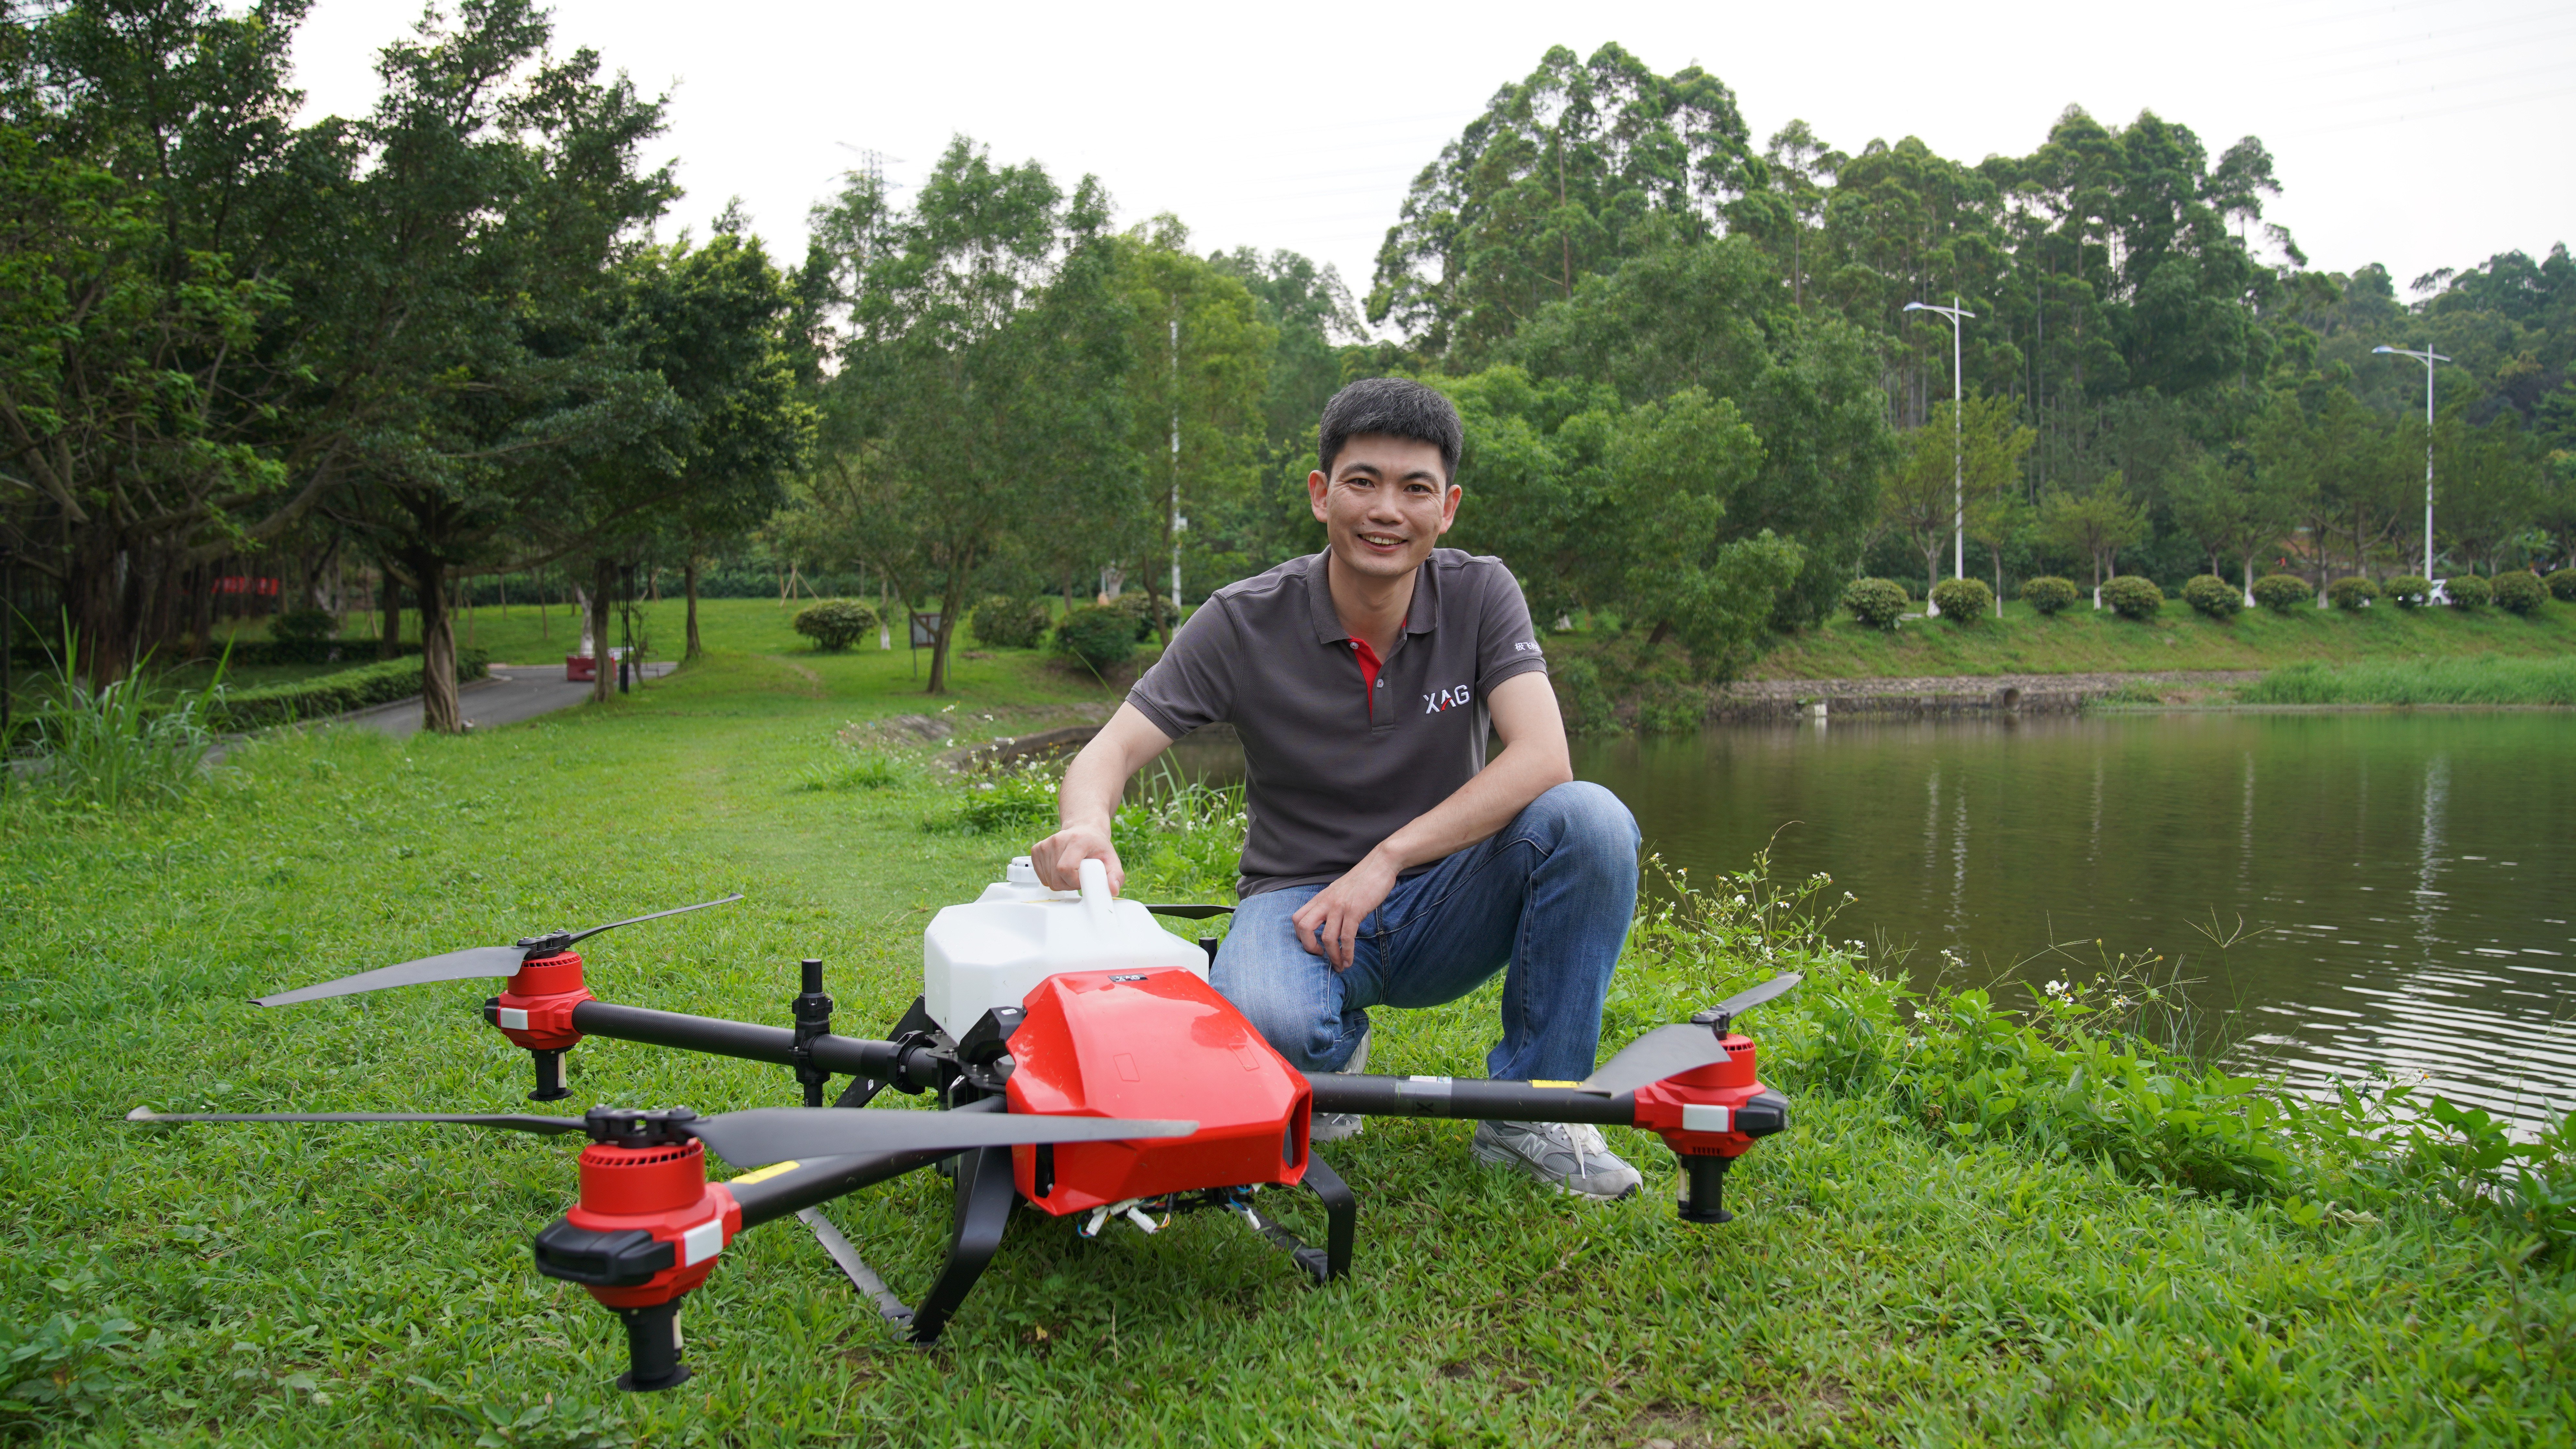 igus linear guides help drones repel pests